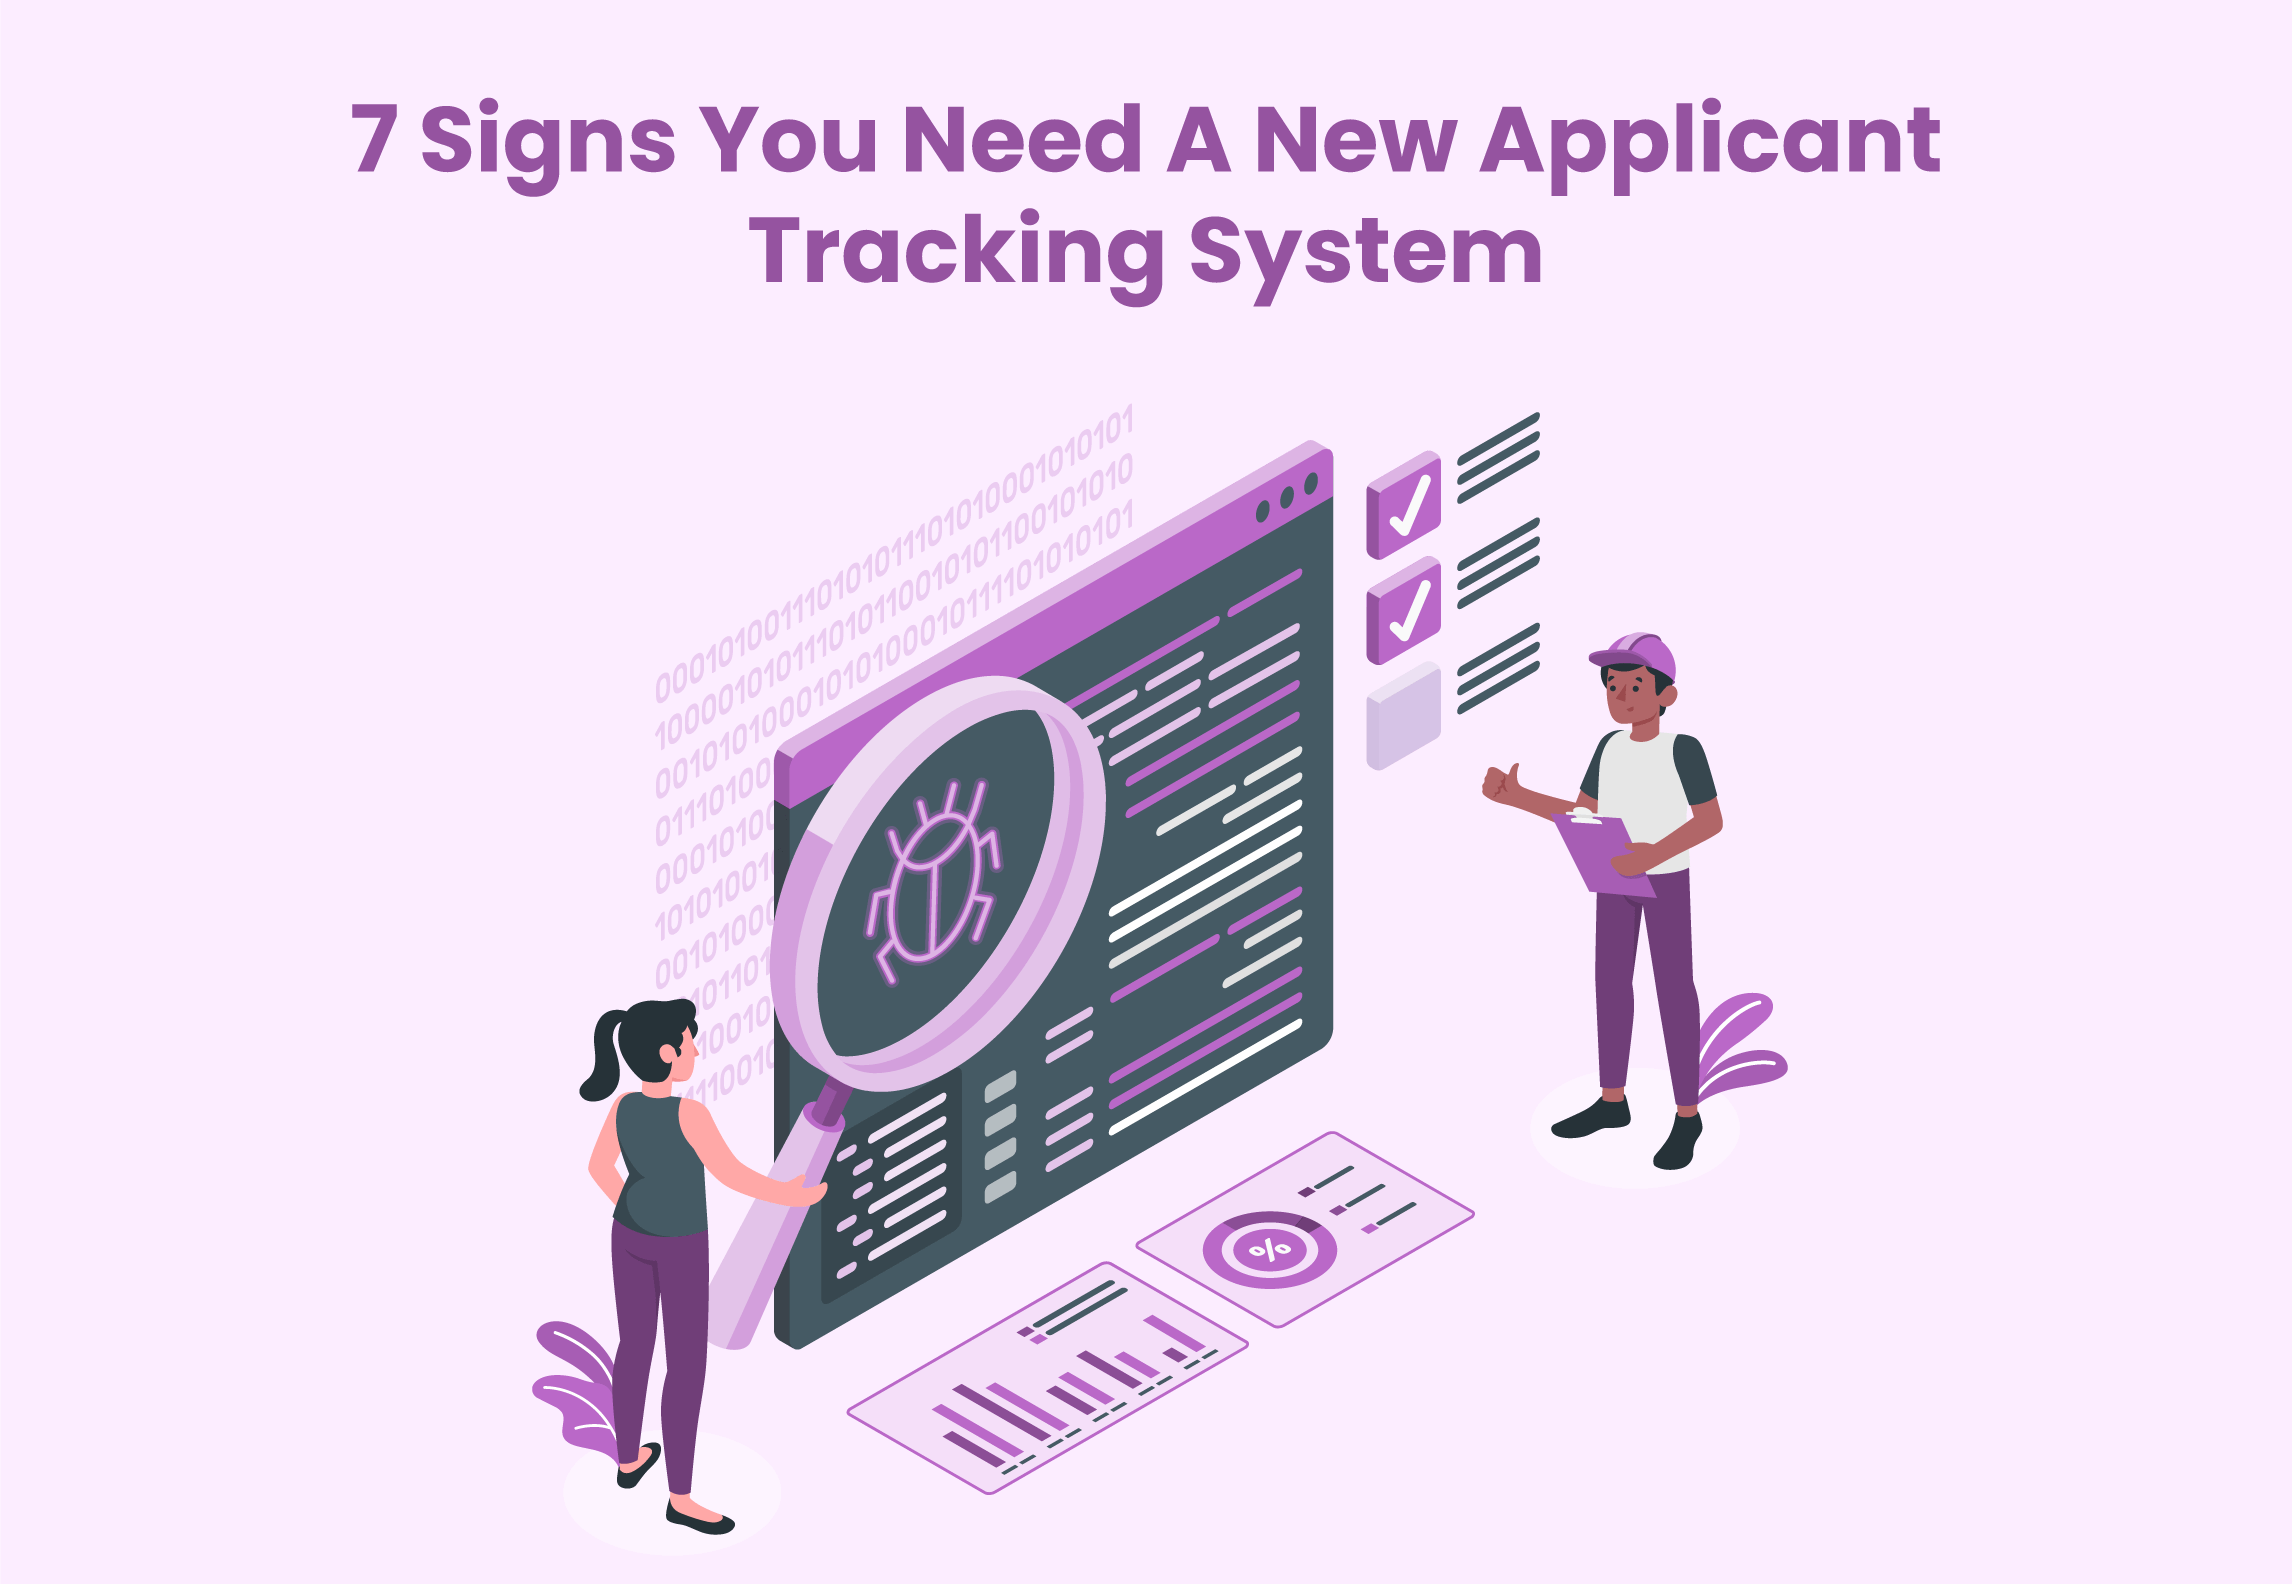 New Applicant Tracking System